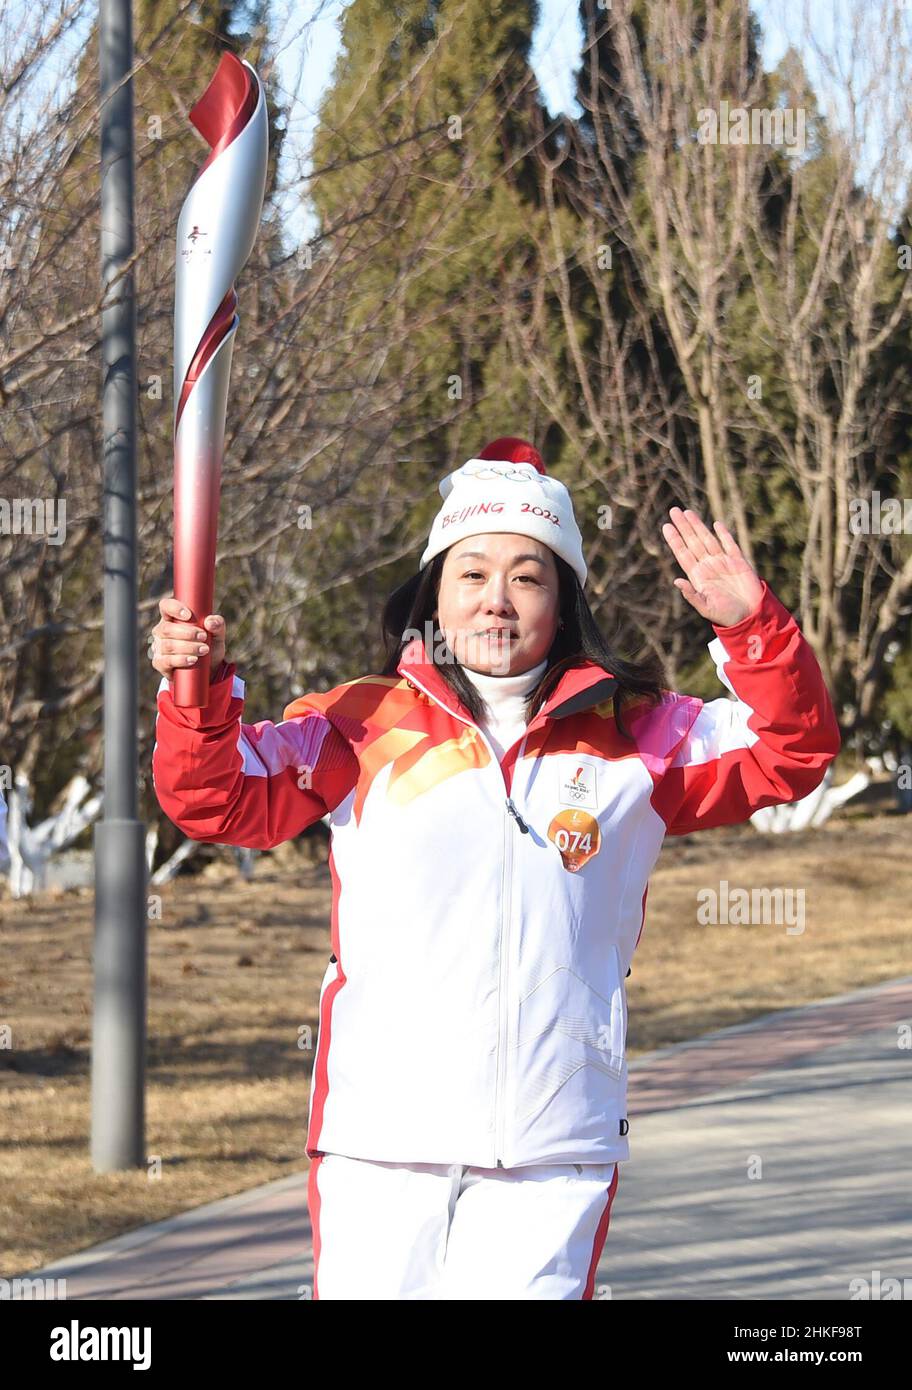 Beijing, China. 4th Feb, 2022. Torch bearer Wang Caihong runs with the torch during the Beijing 2022 Olympic Torch Relay at the Grand Canal Forest Park in Tongzhou District of Beijing, capital of China, Feb. 4, 2022. Credit: Ren Chao/Xinhua/Alamy Live News Stock Photo